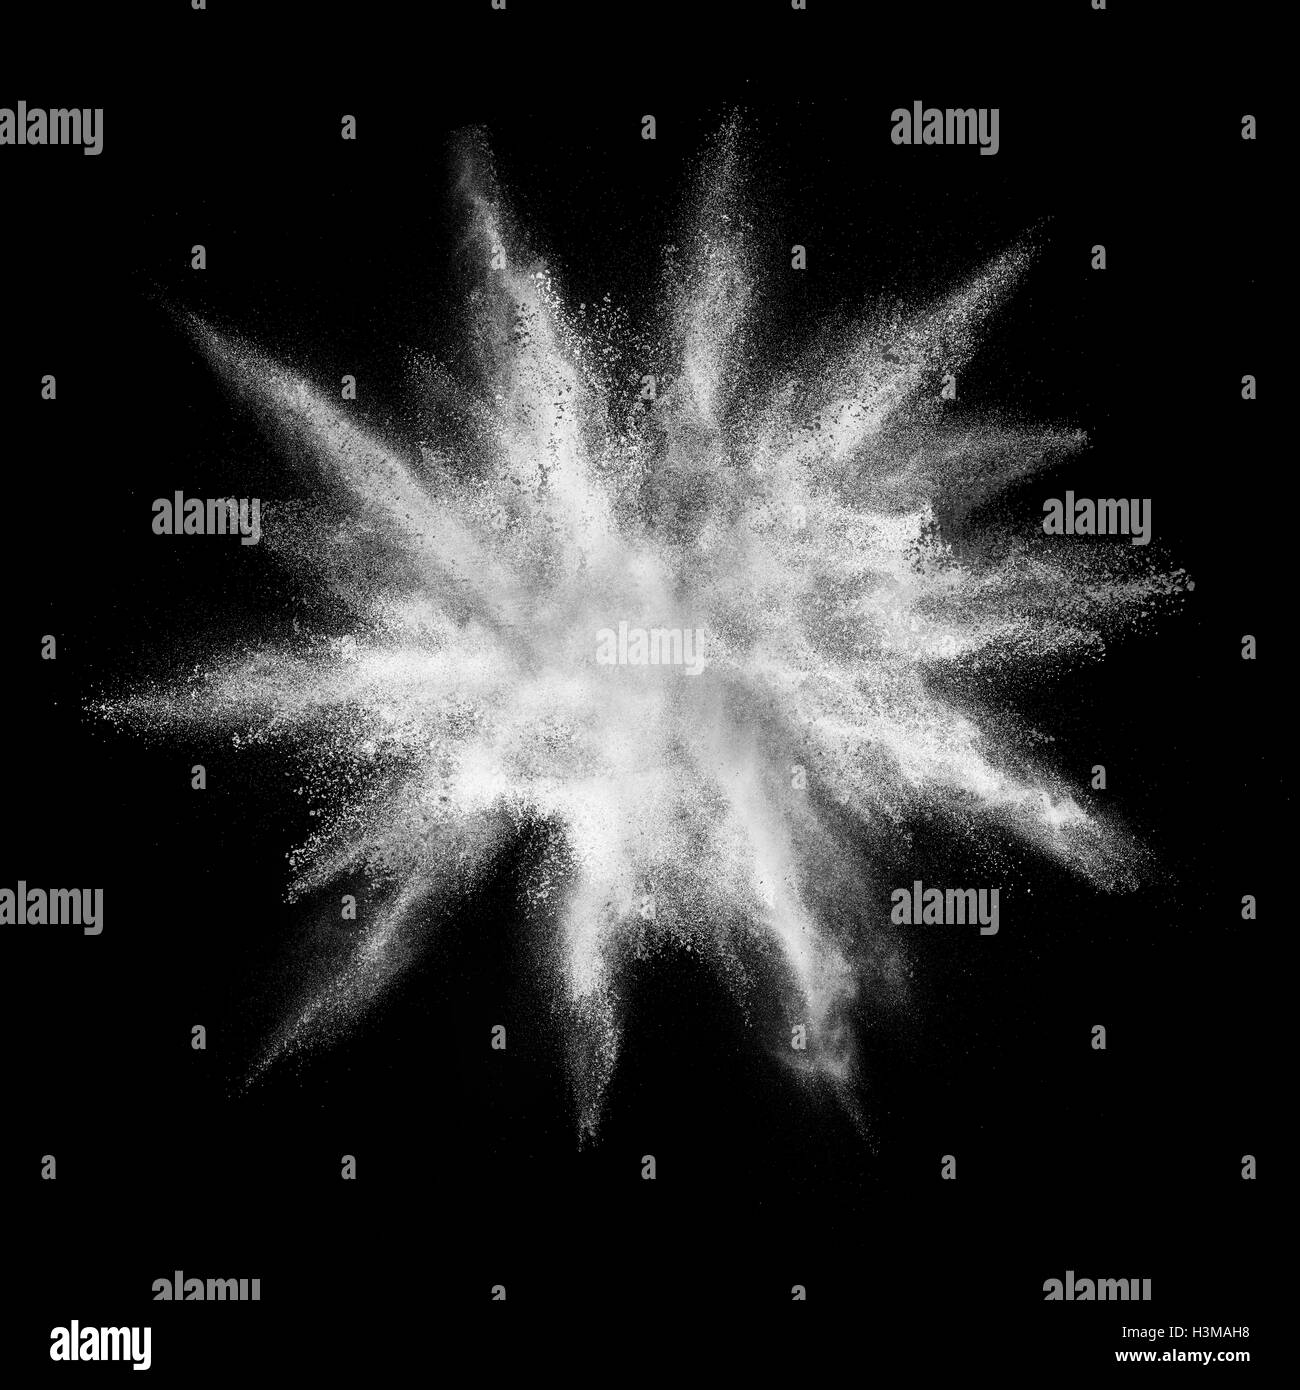 Cosmic explosion Black and White Stock Photos & Images - Alamy